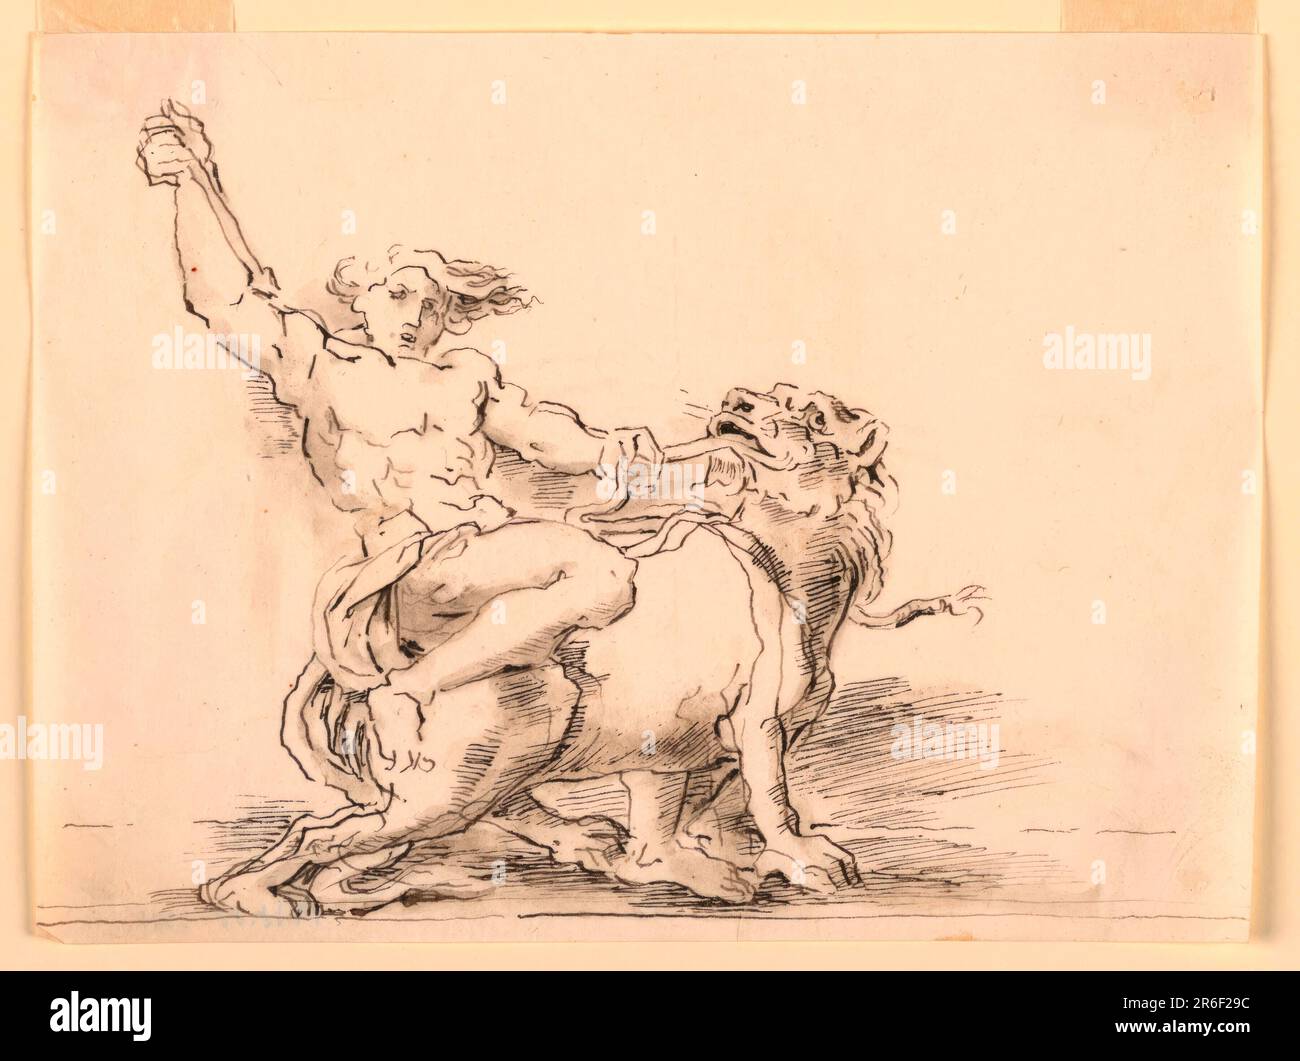 Sketch, Hercules Slaying the Lion (?). Pen and ink, brush and wash on paper. Date: 1820-1850. Museum: Cooper Hewitt, Smithsonian Design Museum. Stock Photo